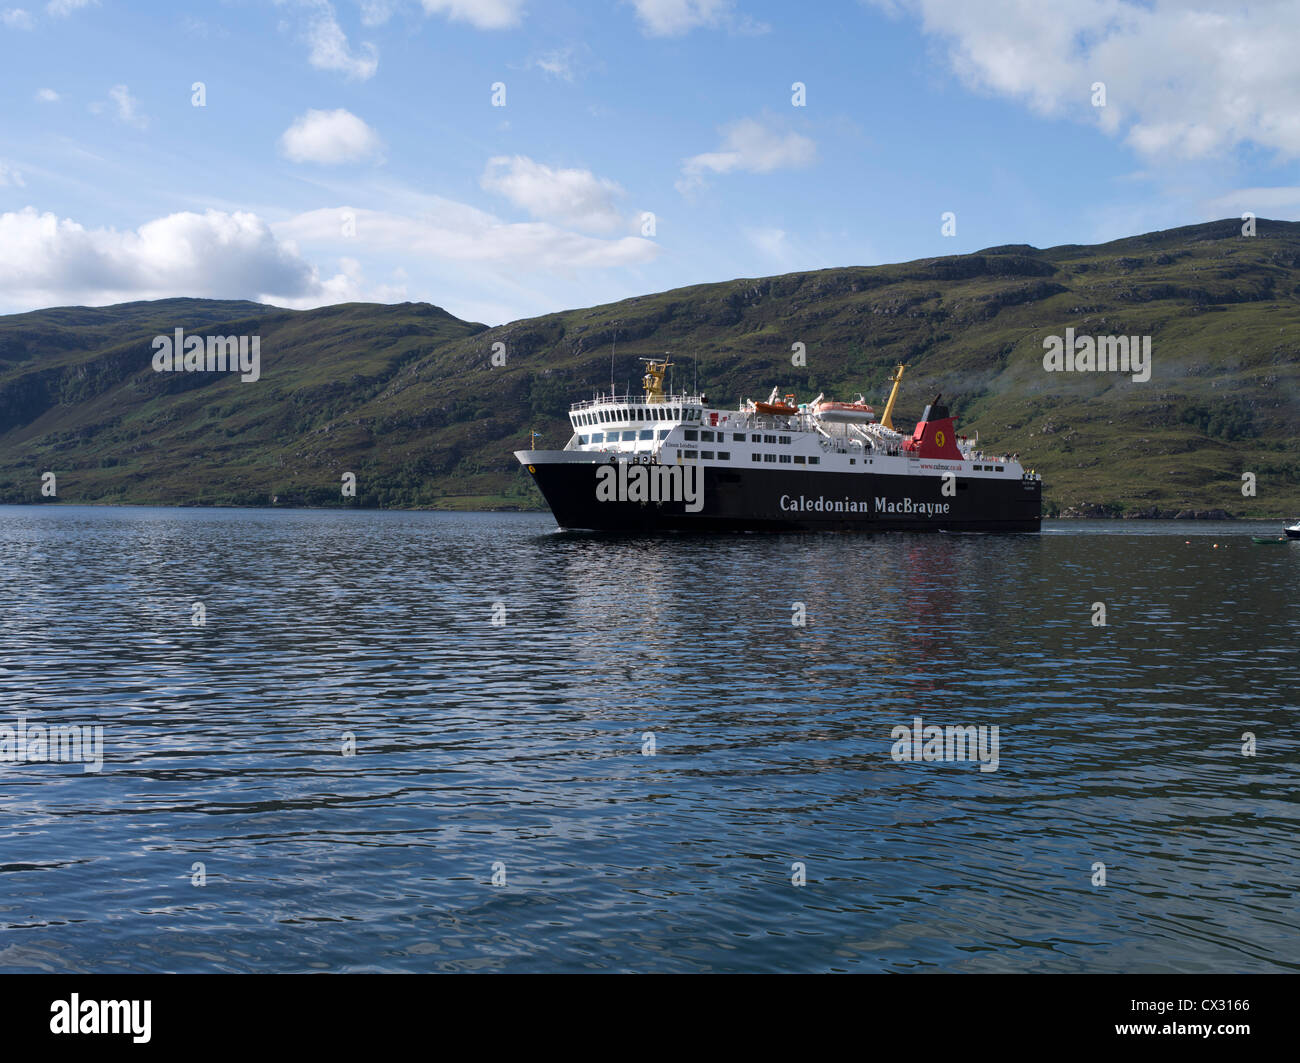 dh Loch Broom scotland ULLAPOOL ROSS CROMARTY Outer Herbrides ferry Isle of Lewis arrivée calmac scottish Island ferries bateau à voile Banque D'Images